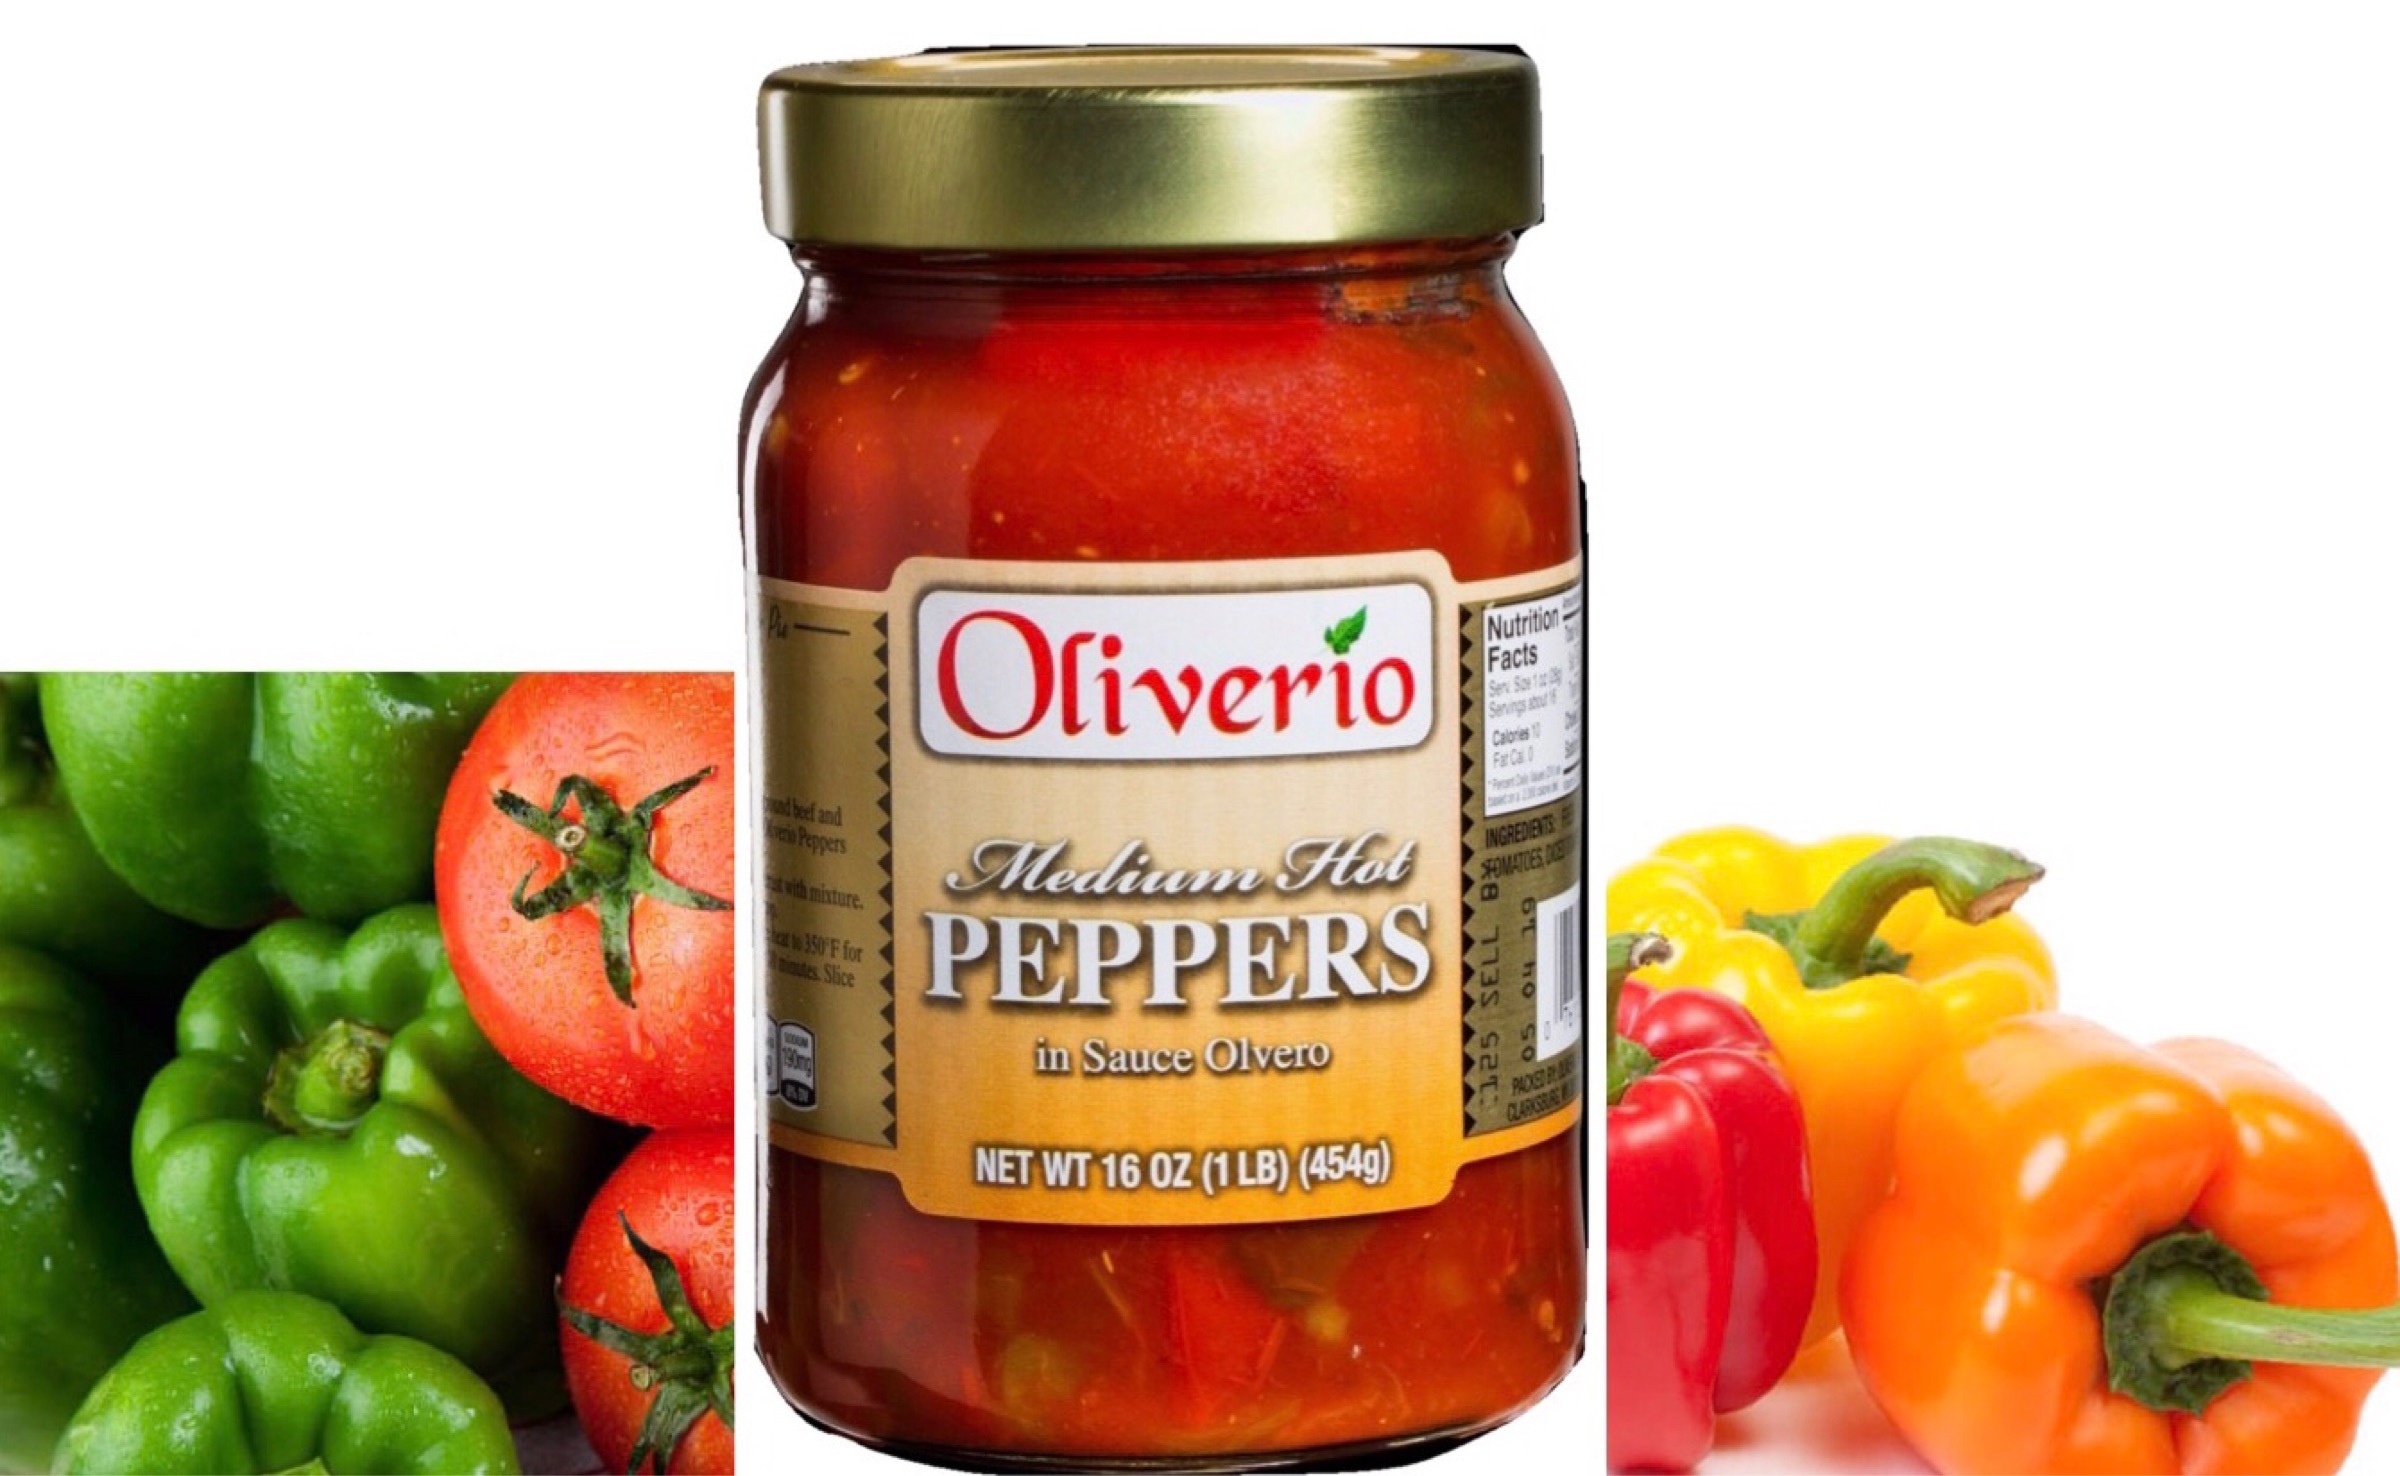 Flavorful Oliverio Peppers in Sauce Recipe: Spice Up Your Dishes!